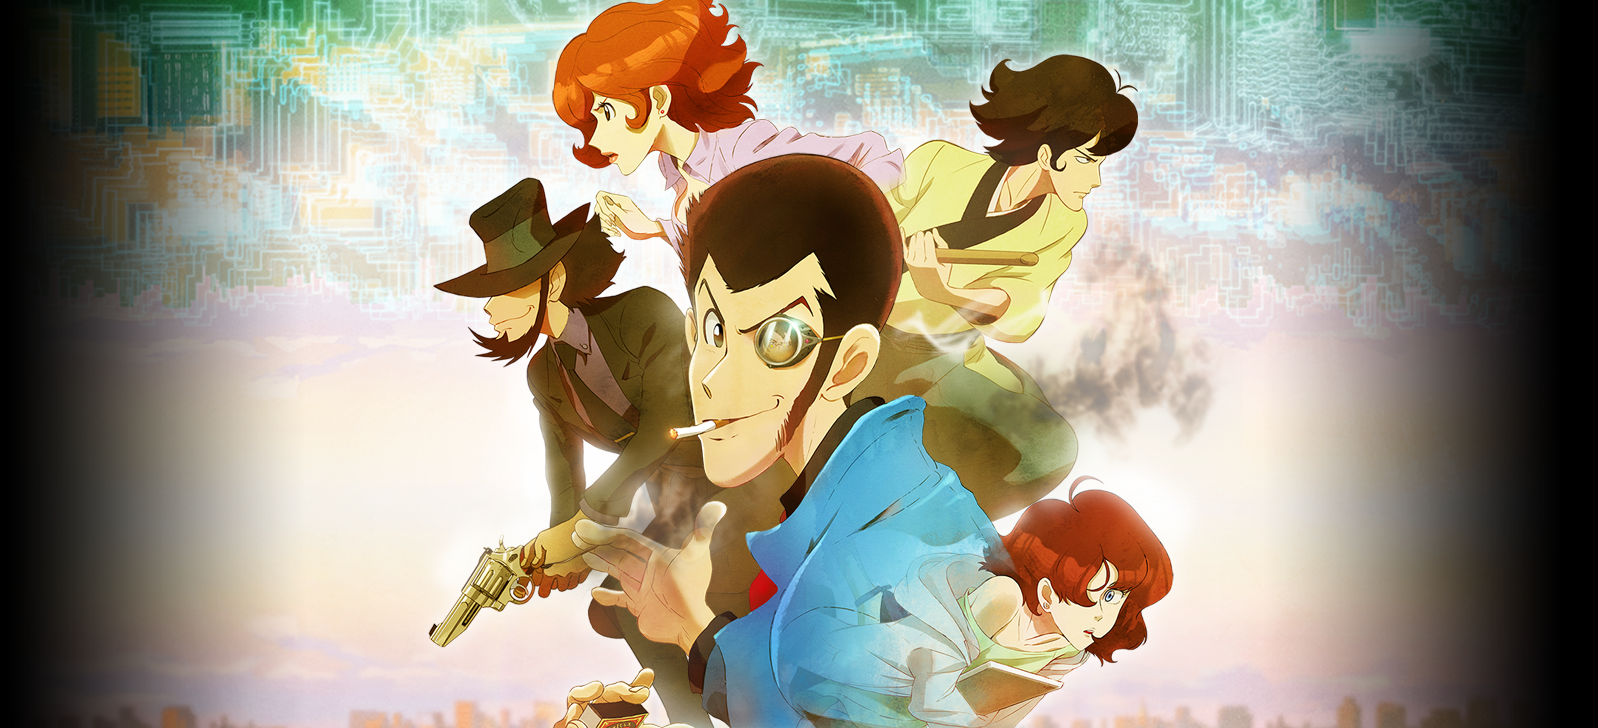 Lupin Iii Part - Lupin Iii Part V , HD Wallpaper & Backgrounds